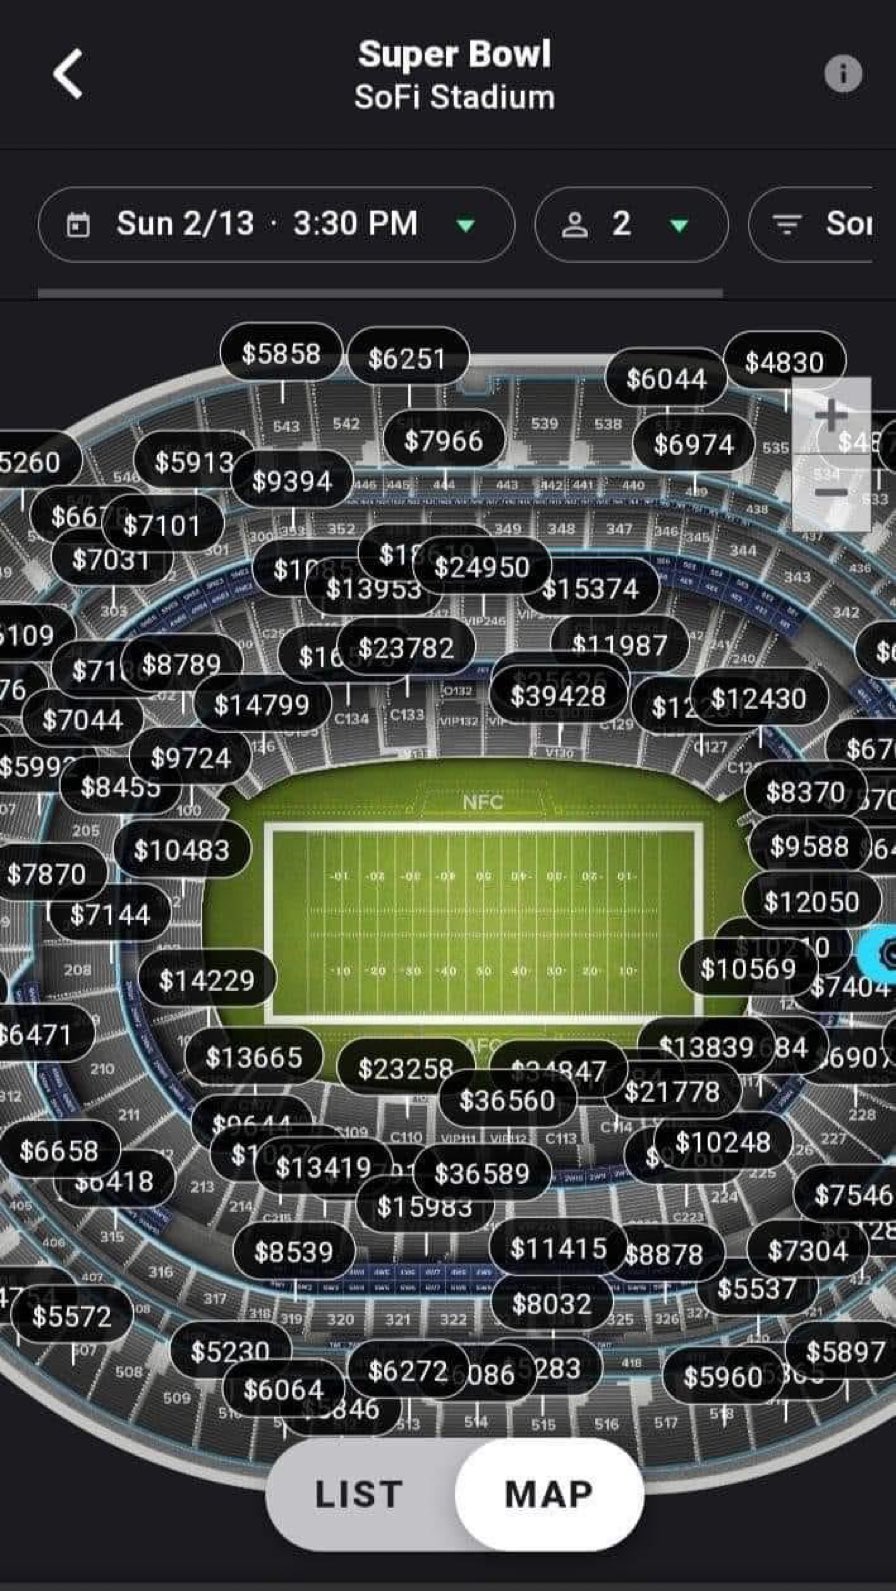 cheapest and most expensive super bowl tickets